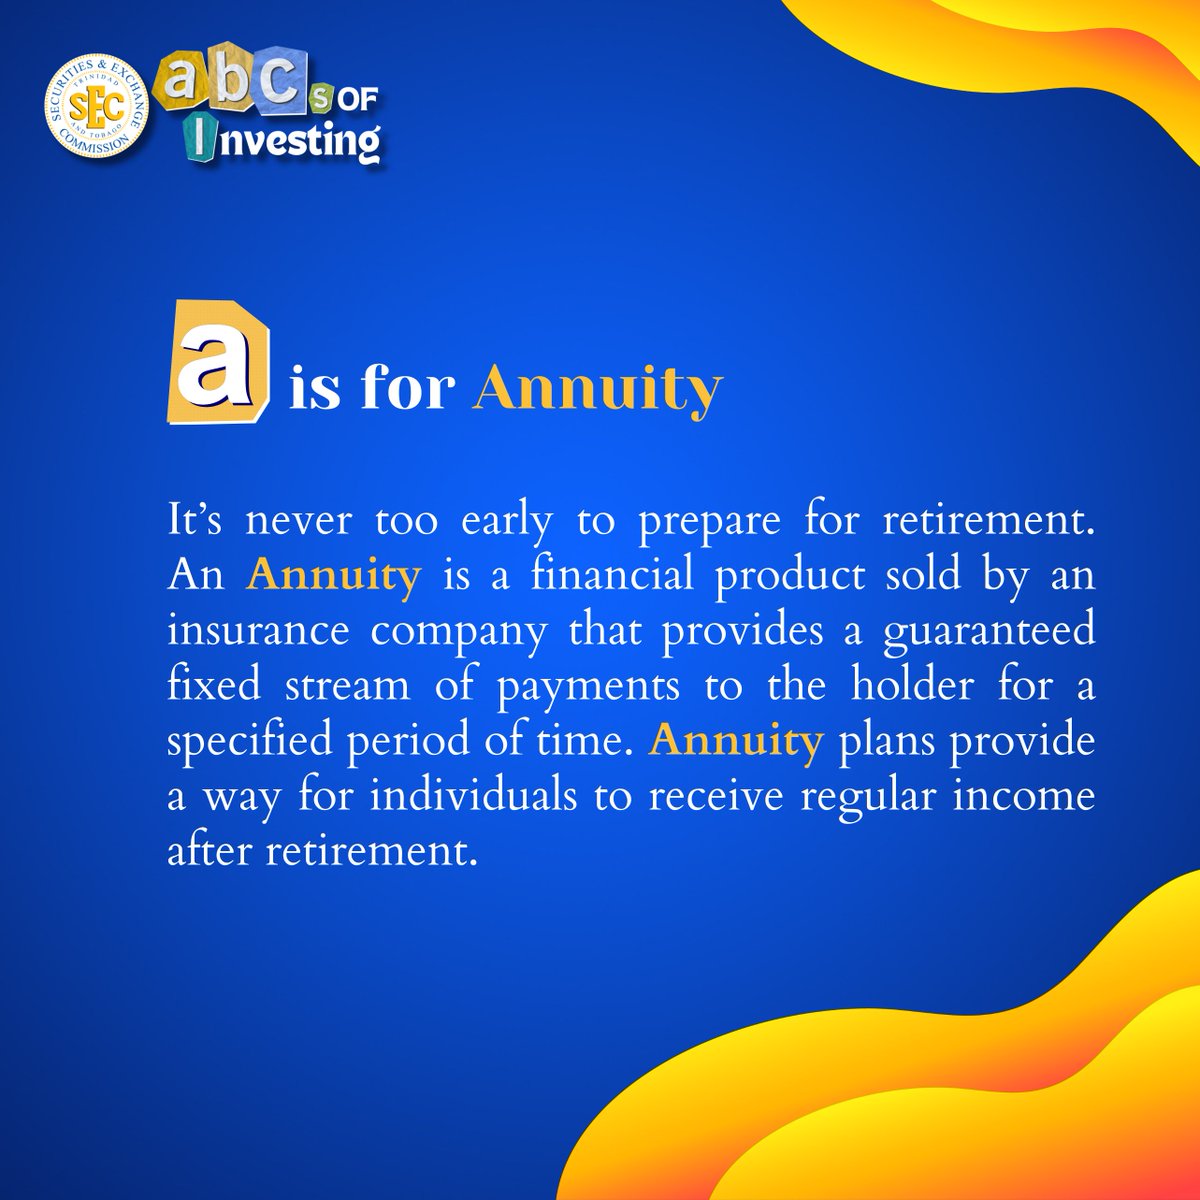 Happy National Investor Education Month! It’s time to learn the ABCs of Investing.

The letter of the day is “A” for Annuity. 

You Invest. We Protect. Everyone Benefits.

#IEmonth #InvestorEducation #FinancialInclusion #TTSEC